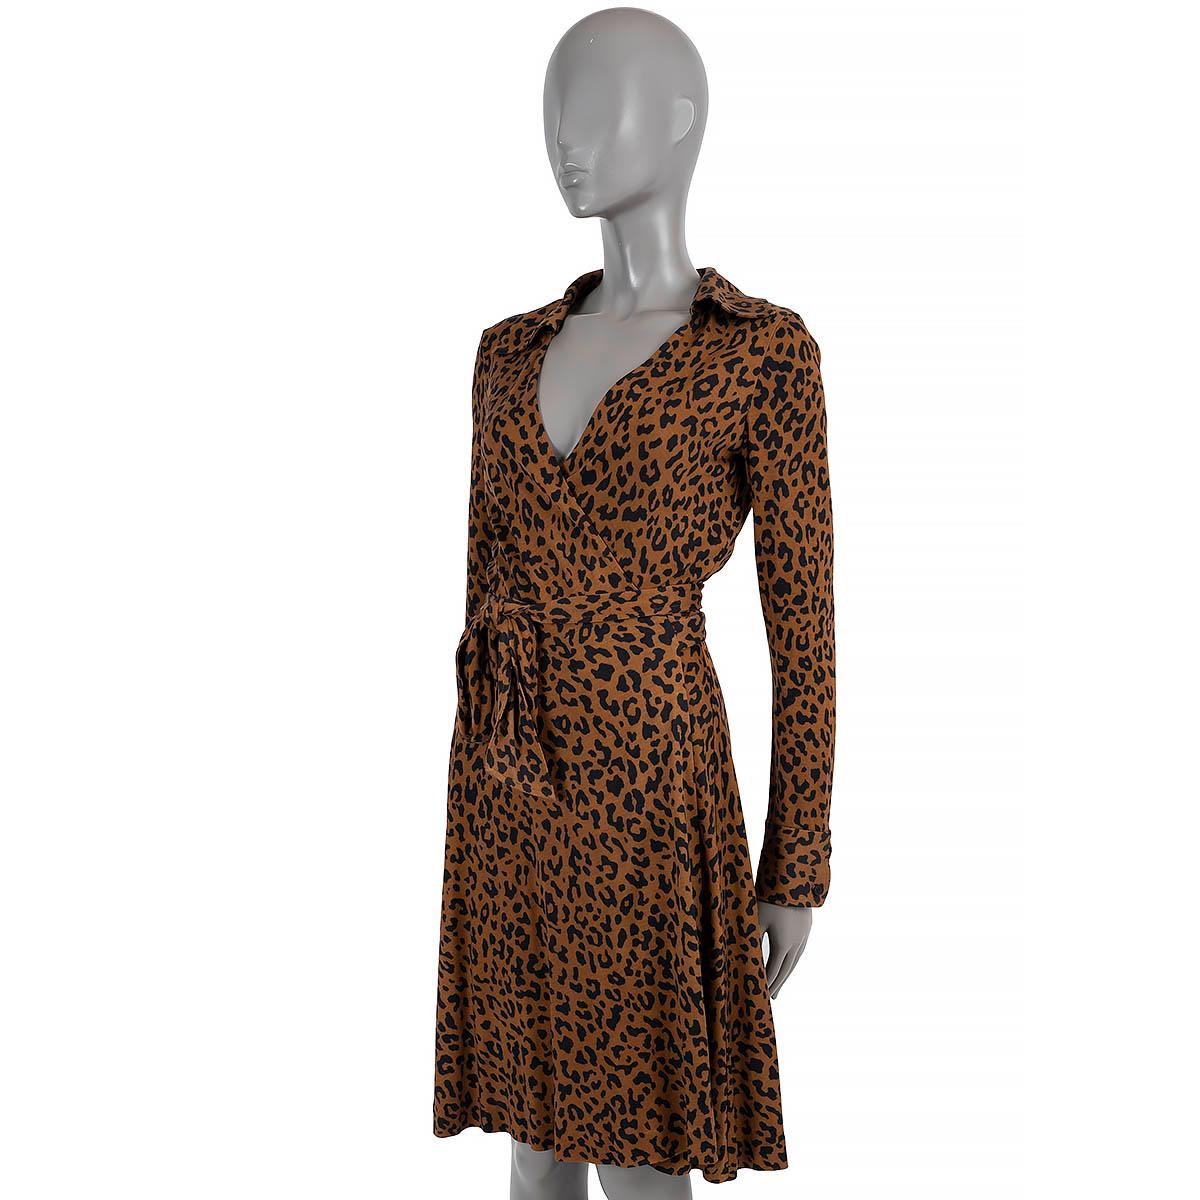 100% authentic Diane von Furstenberg Jeanne leopard wrap dress in black and brown silk (100%). Features long sleeves. Unlined. Has been worn and is in excellent condition.

Measurements
Tag Size	6
Size	S
Shoulder Width	37cm (14.4in)
Bust From	96cm